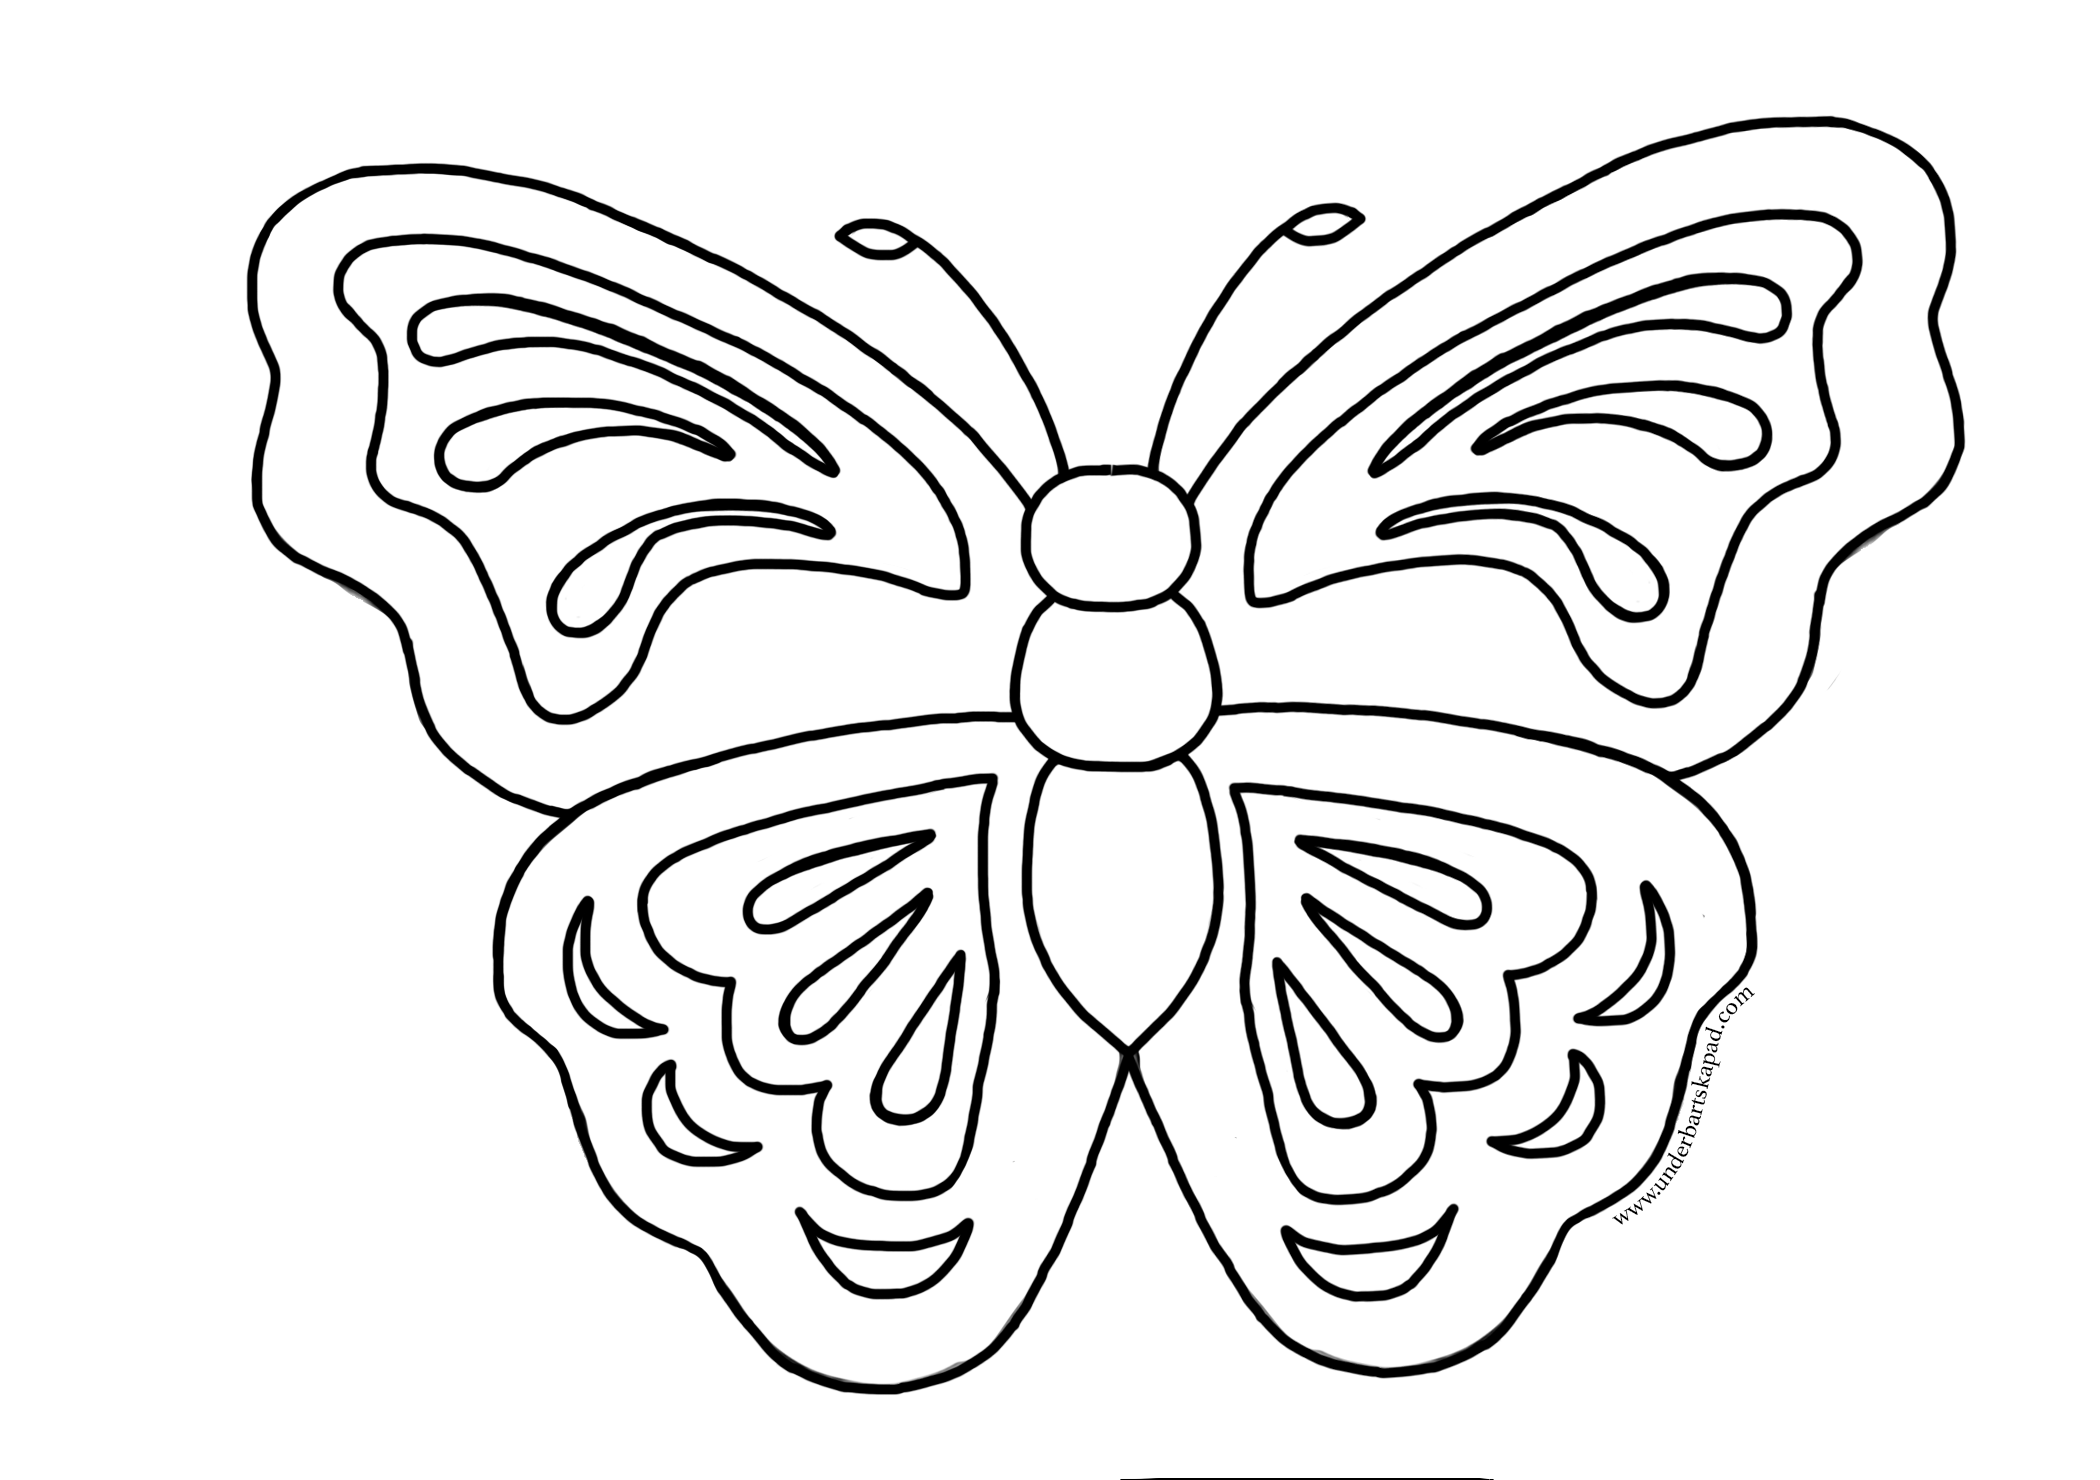 Butterfly Coloring Pages - FREE Download - Underbart skapad